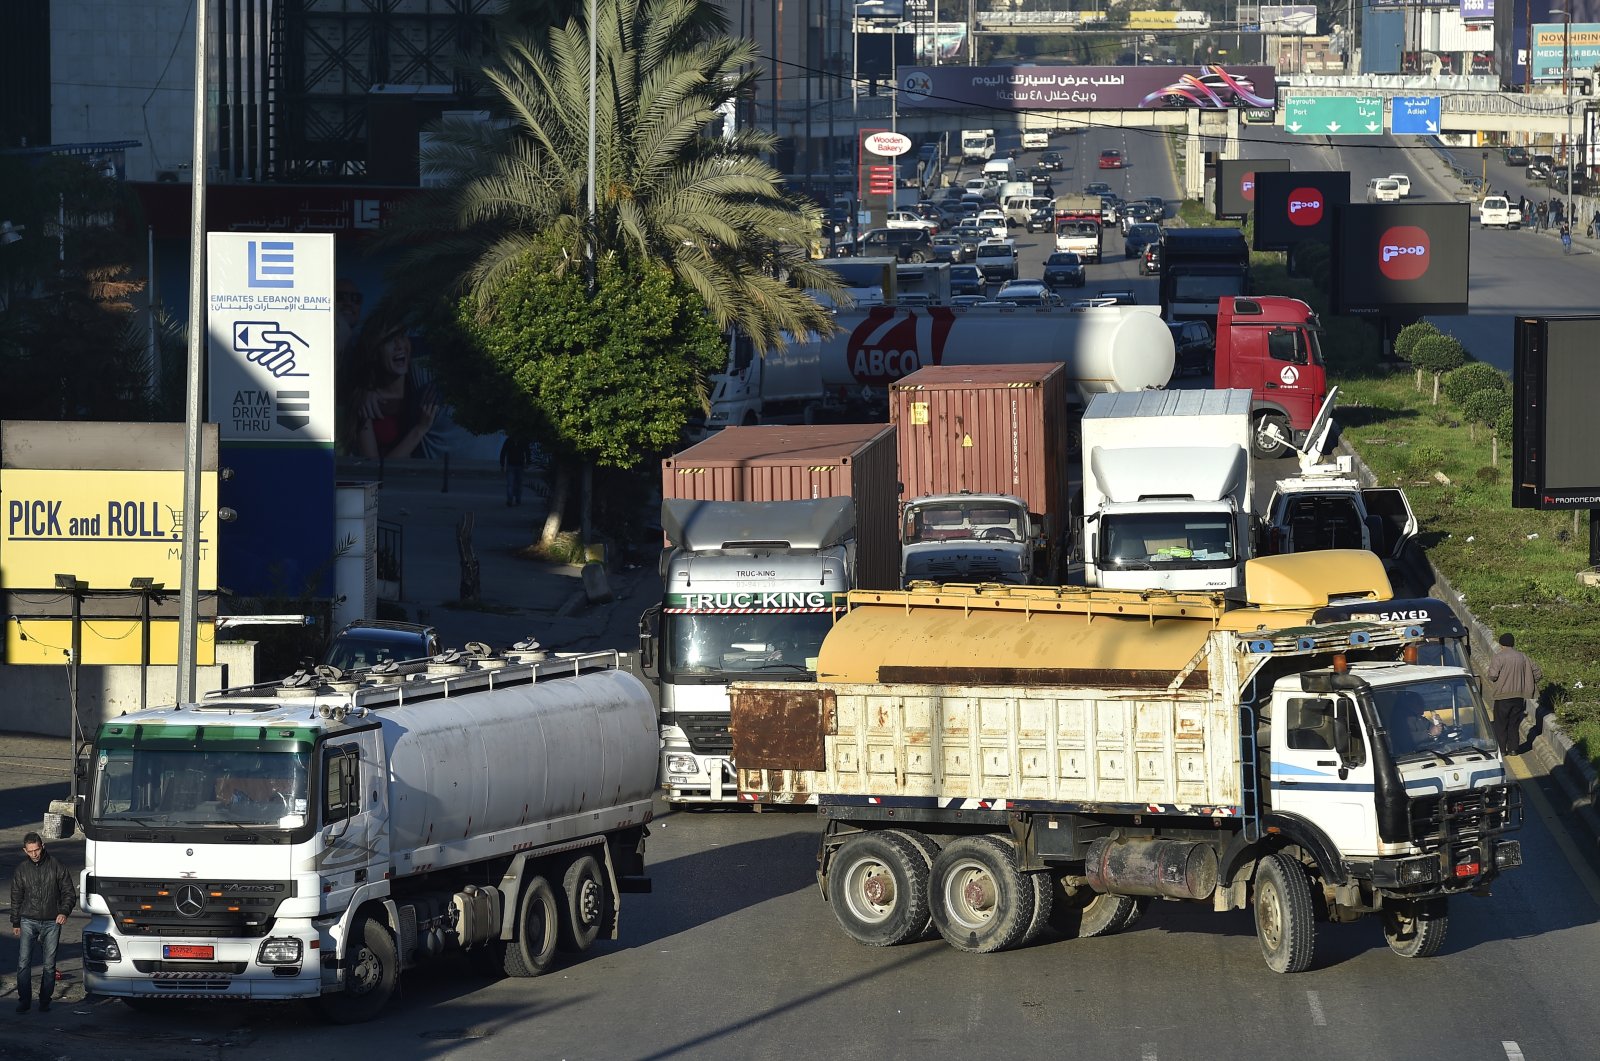 Demonstrators block the road with trucks during a protest against increased costs, gasoline prices and deteriorating living conditions, in the Dora area of northern Beirut, Lebanon, Feb. 2, 2022. (EPA Photo)